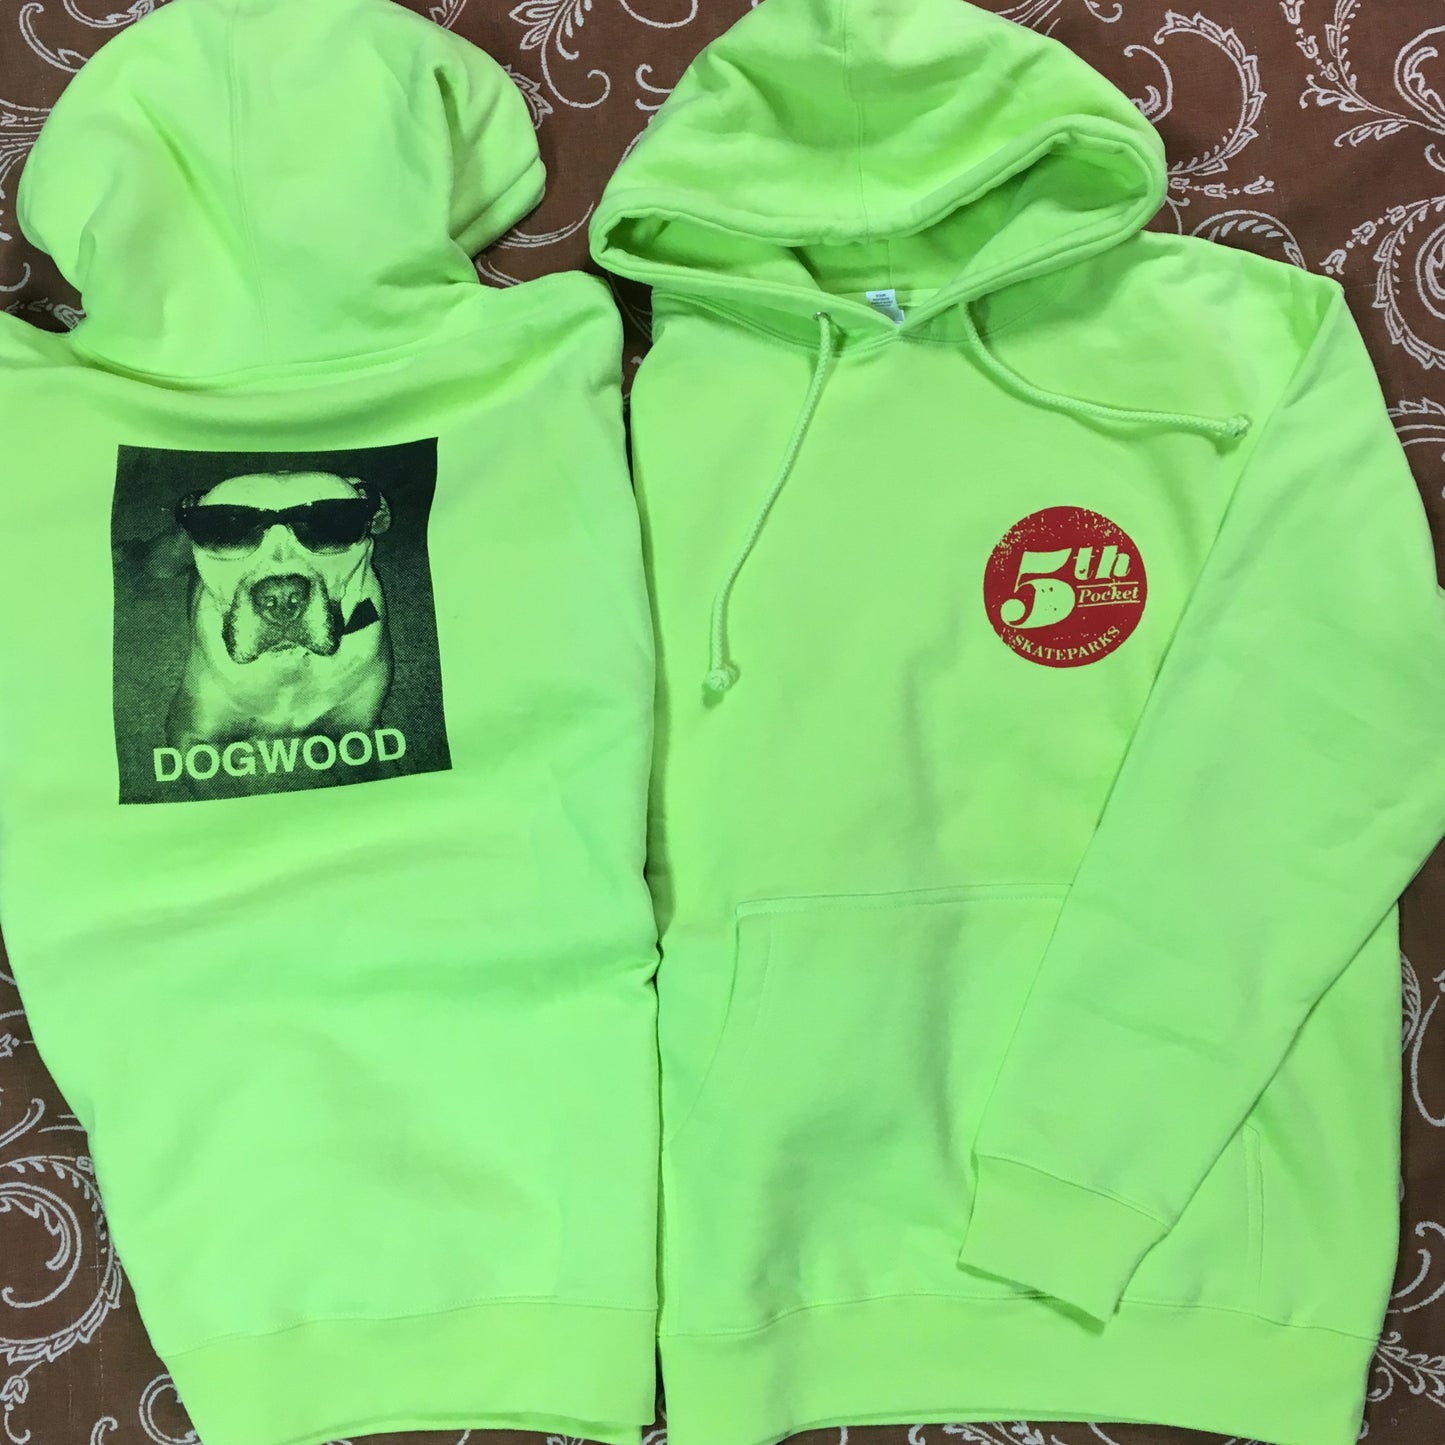 5th Pocket X Shades Pullover Hoodie Safety Grn (size options listed)